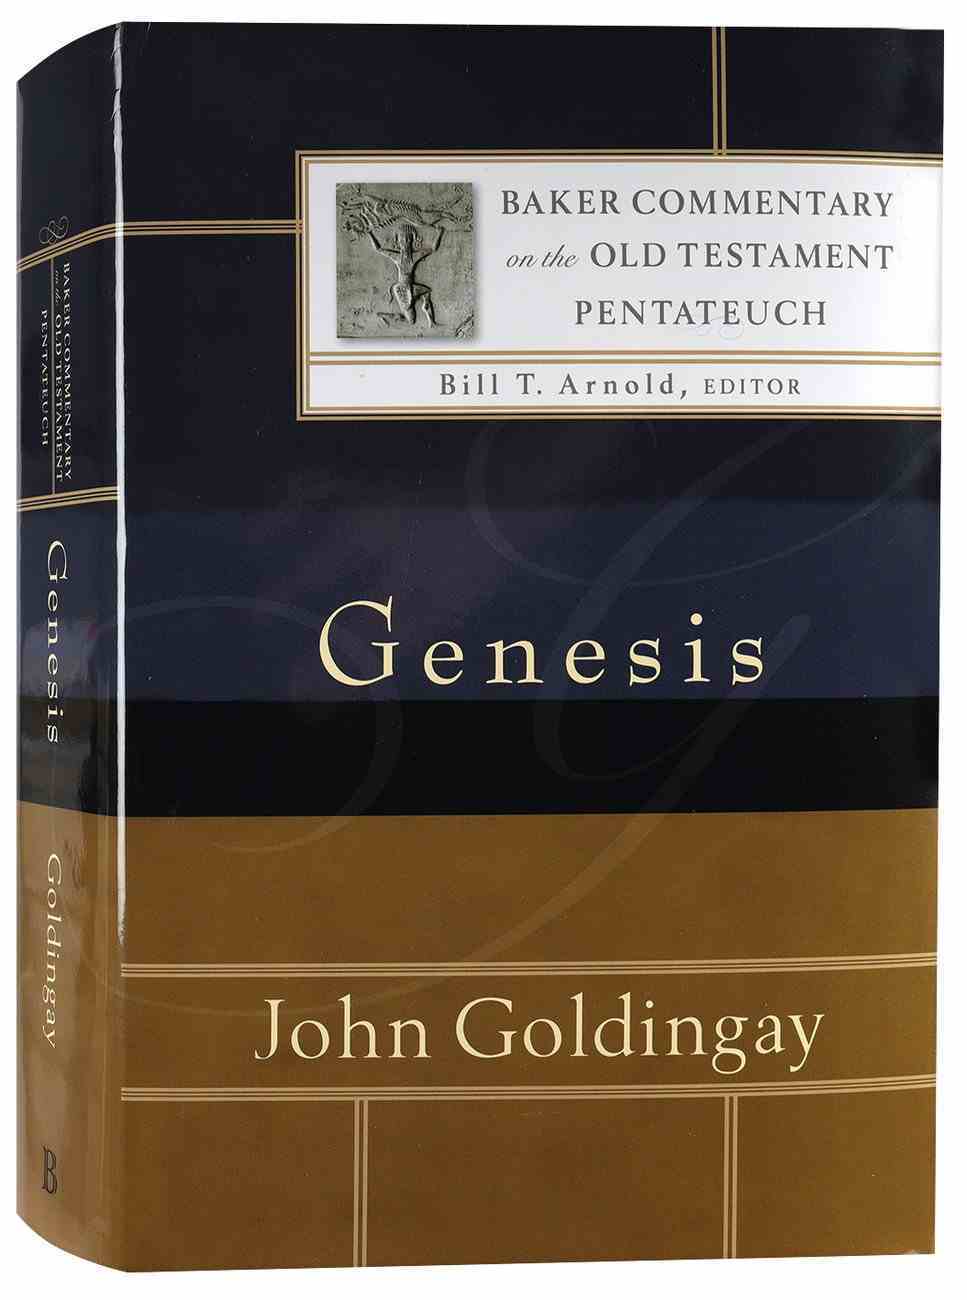 Genesis (Baker Commentary On The Old Testament Pentateuch Series) Hardback